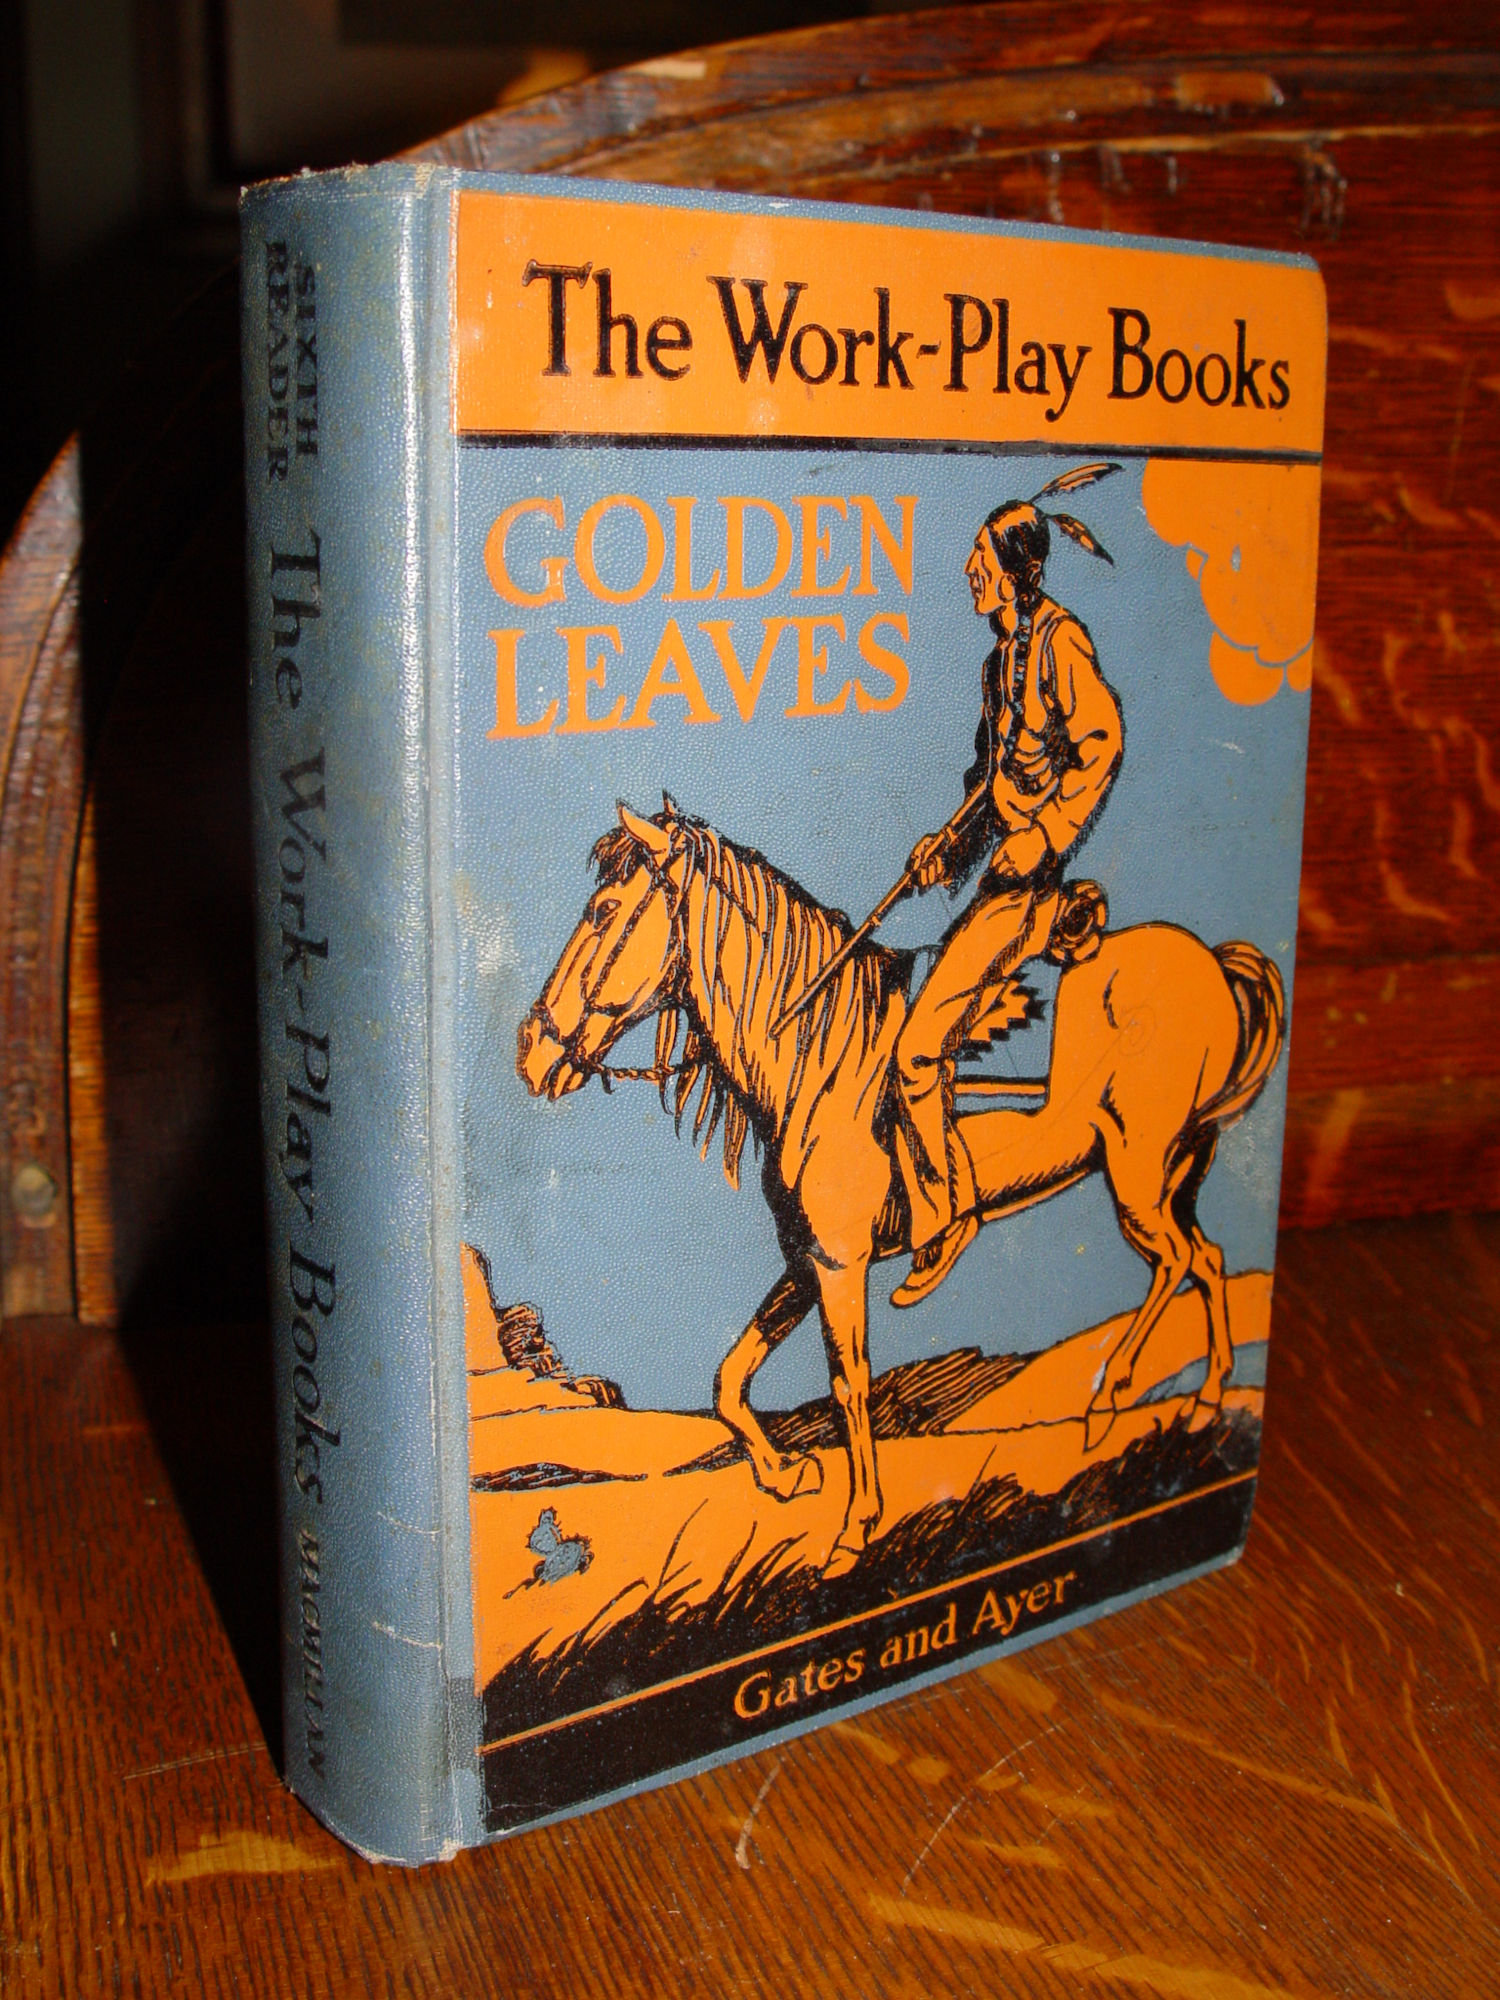 Golden Leaves 1935; The Work-Play Books by Arthur
                Gates and Jean Y. Ayer